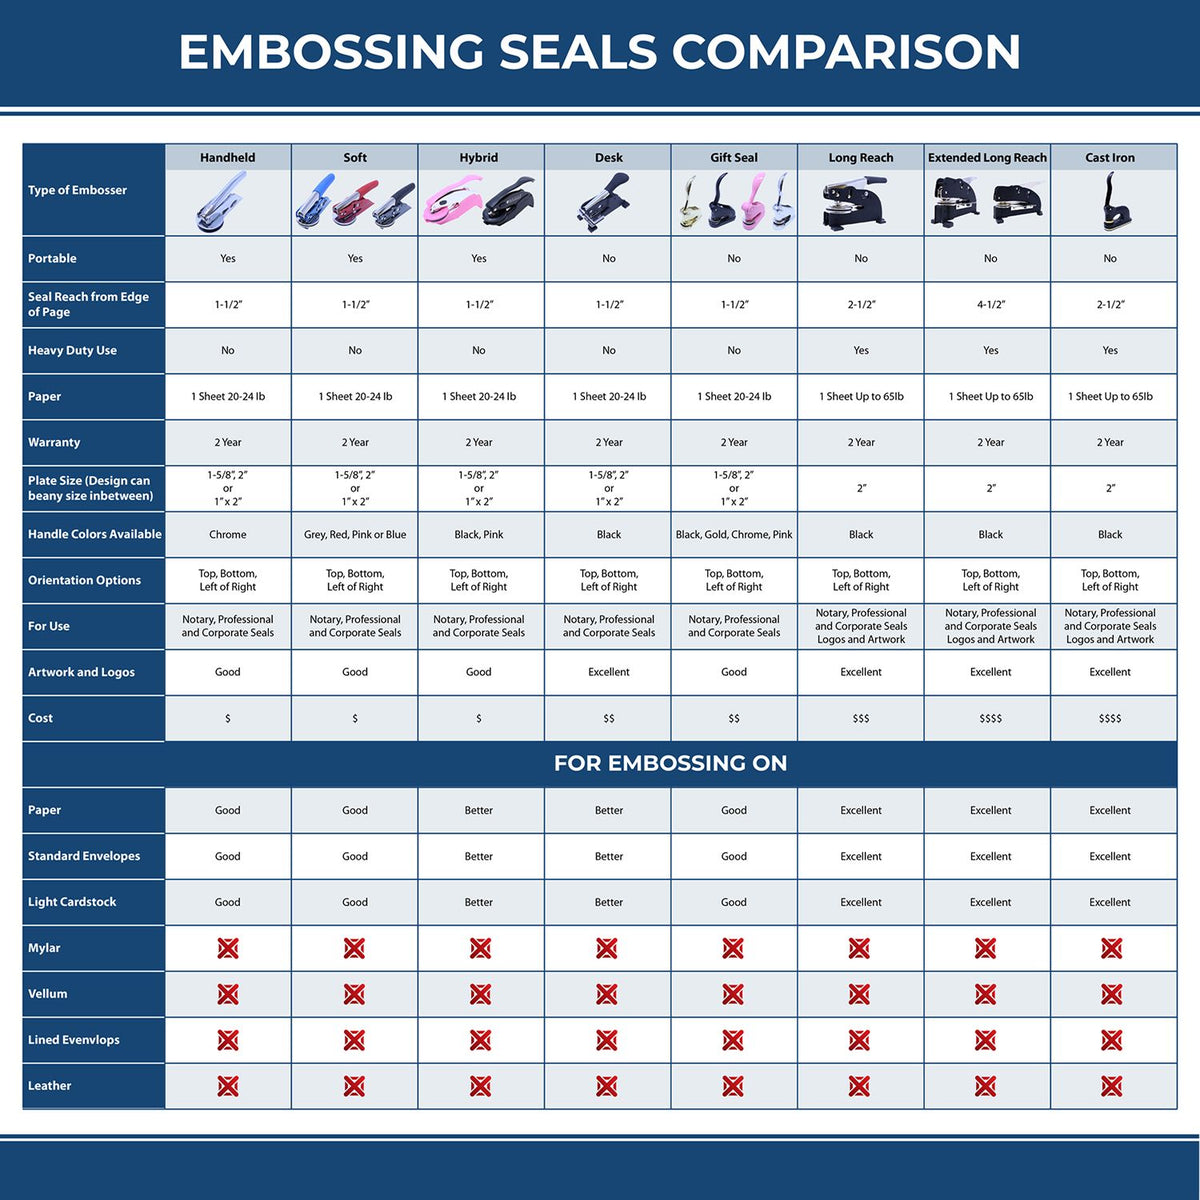 A comparison chart for the different types of mount models available for the Maine Engineer Desk Seal.